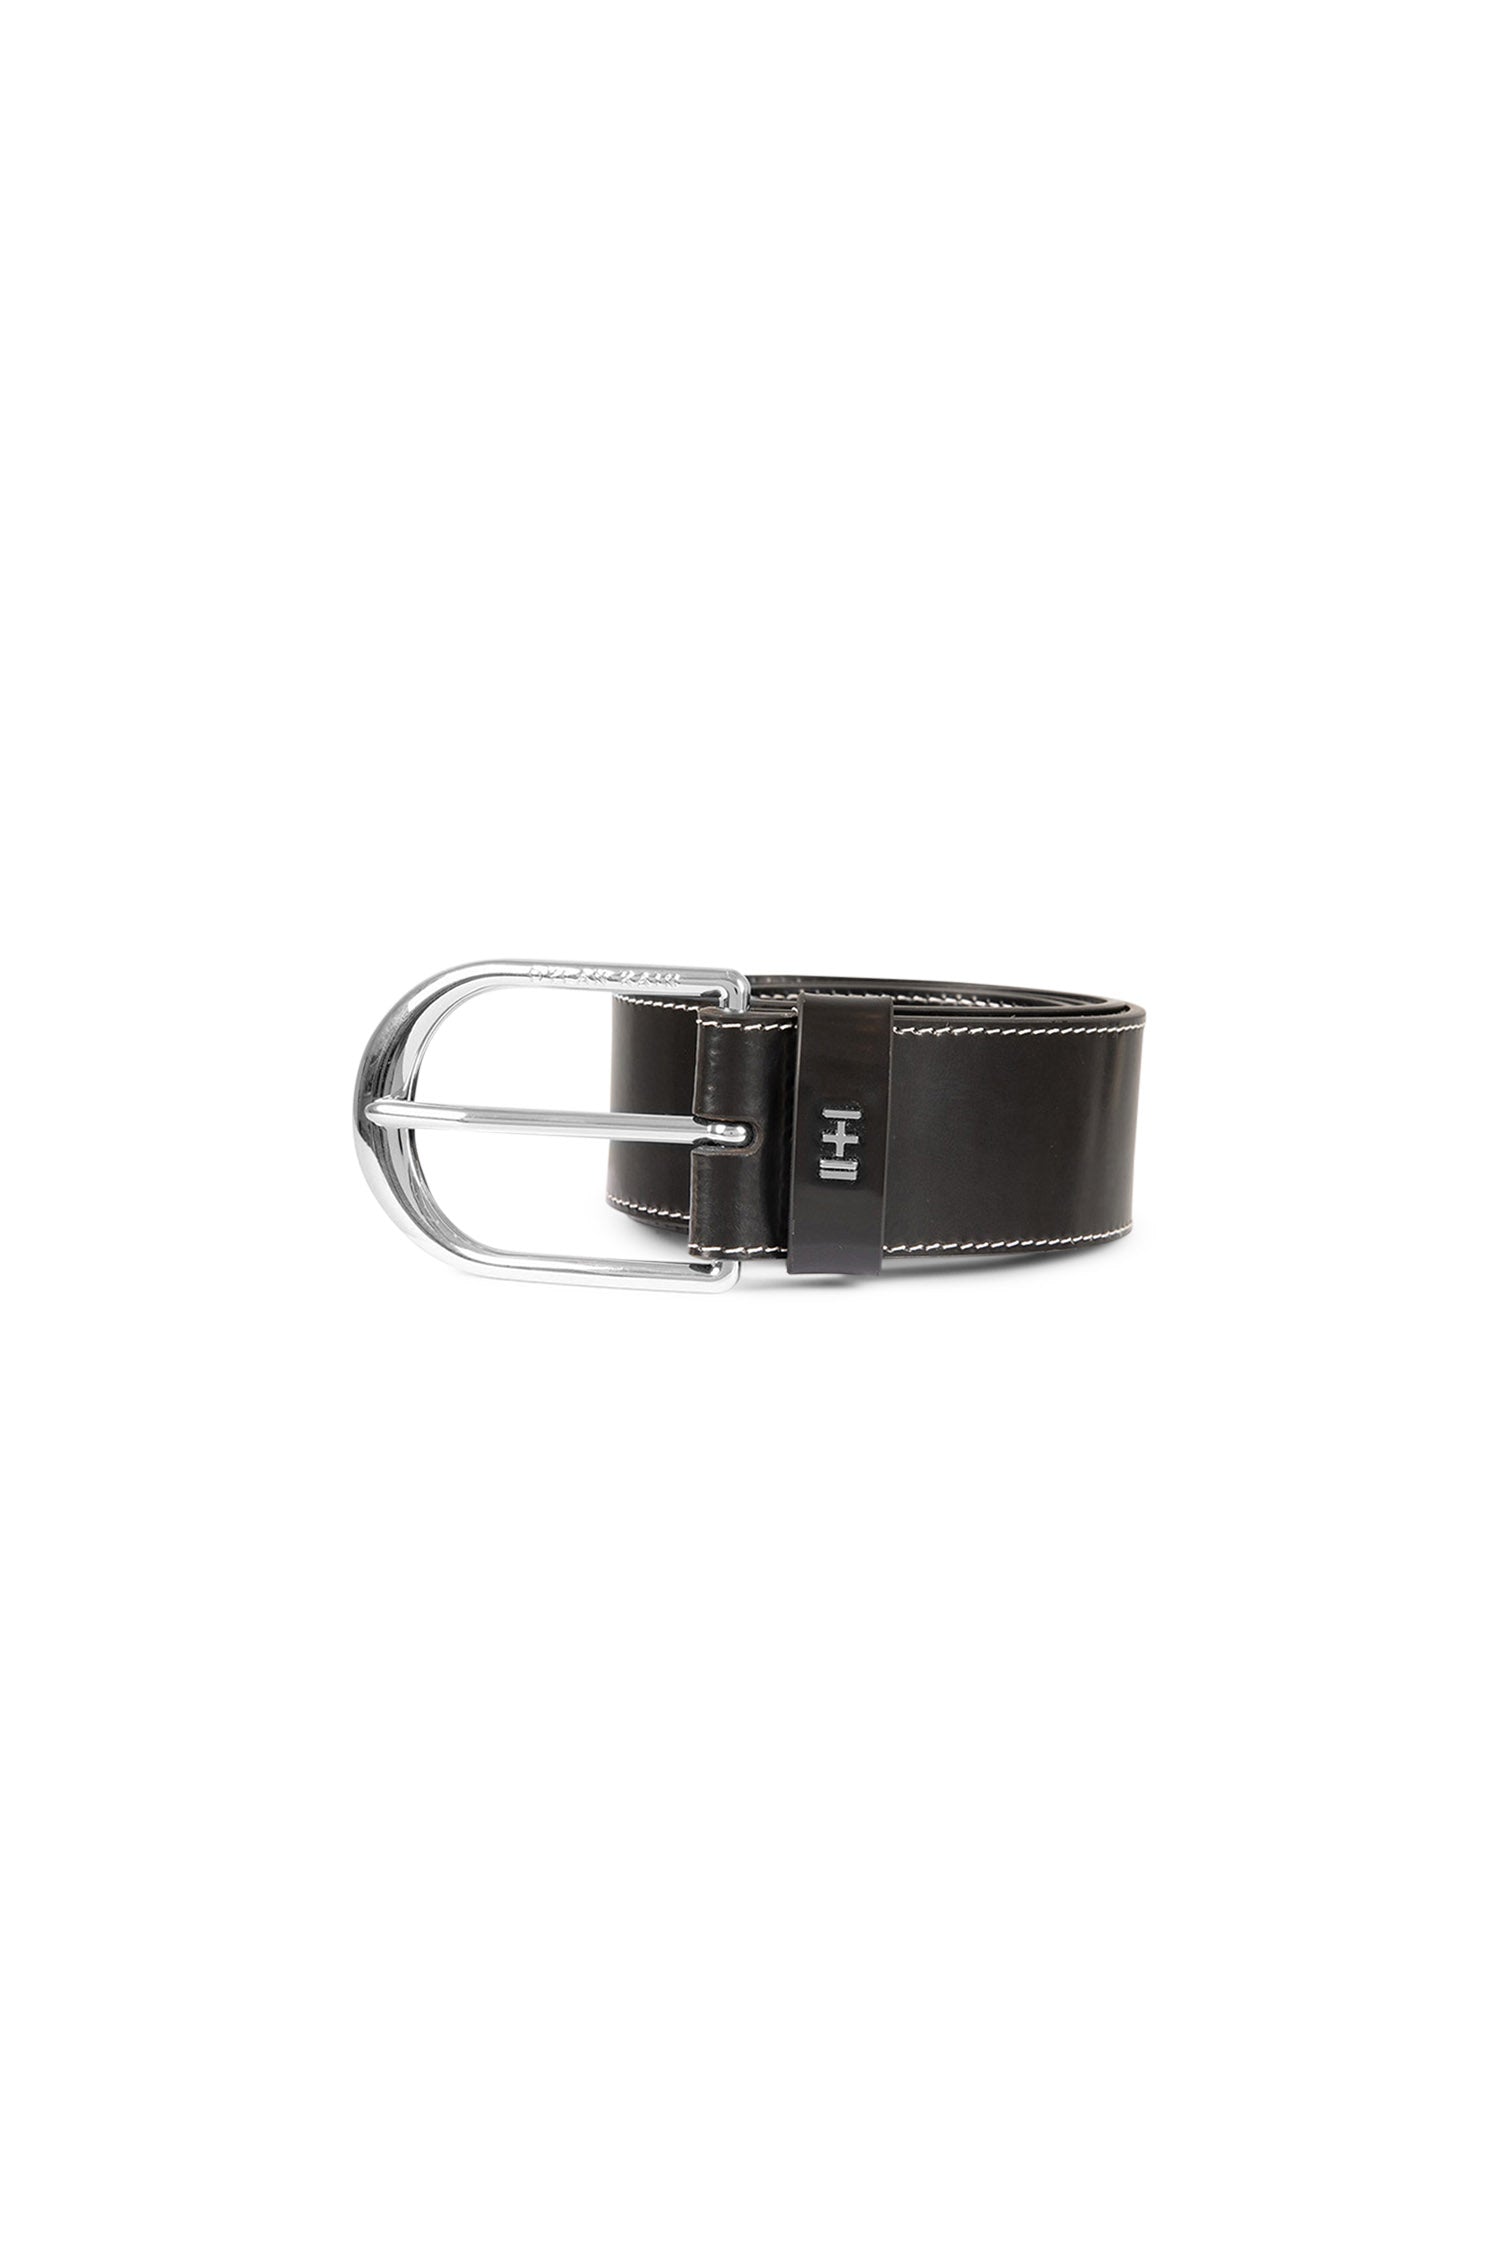 The Nika Lux Belt Silver